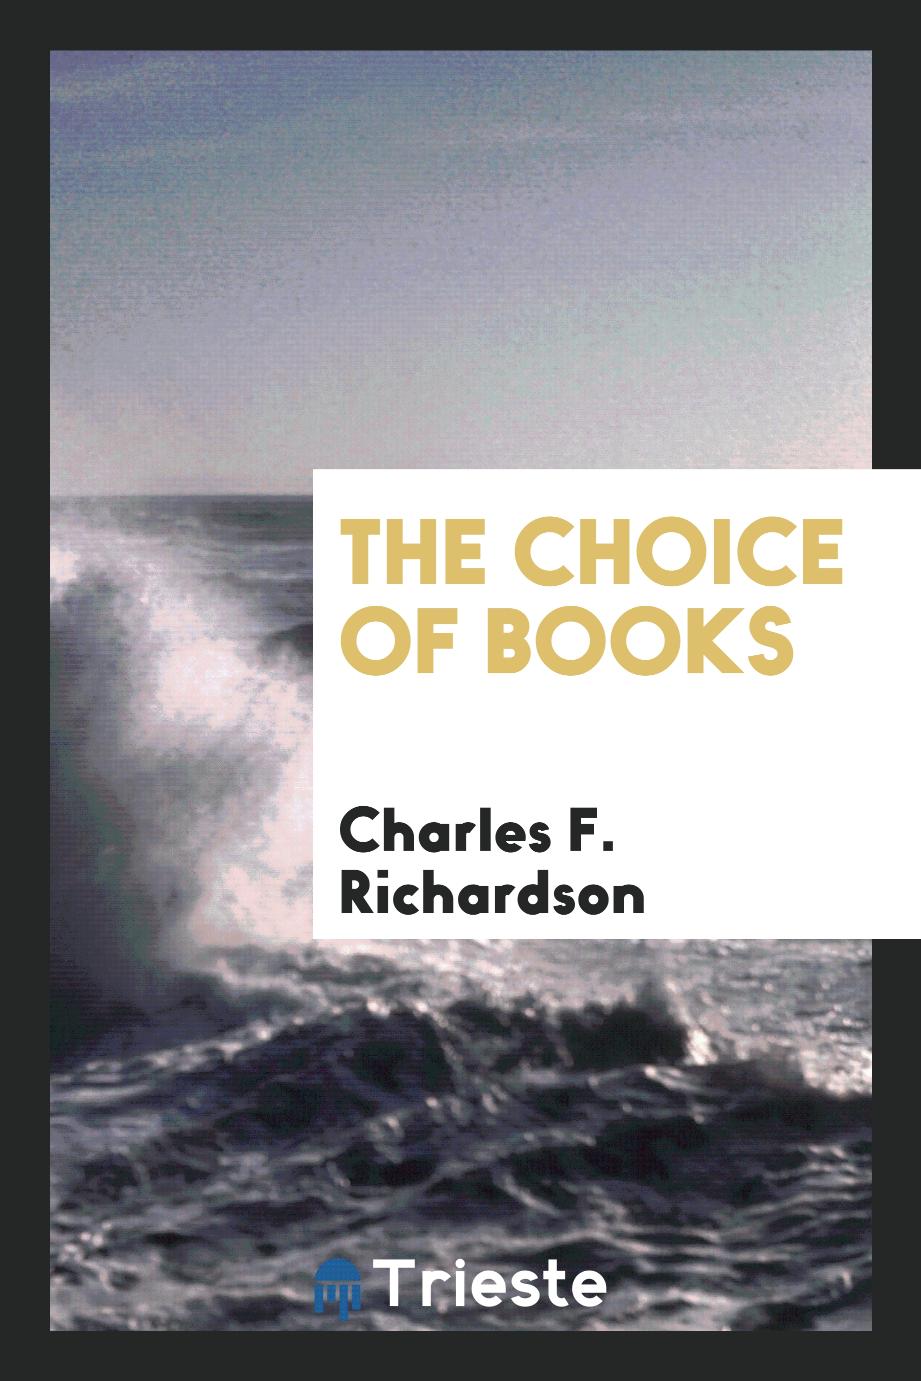 The choice of books